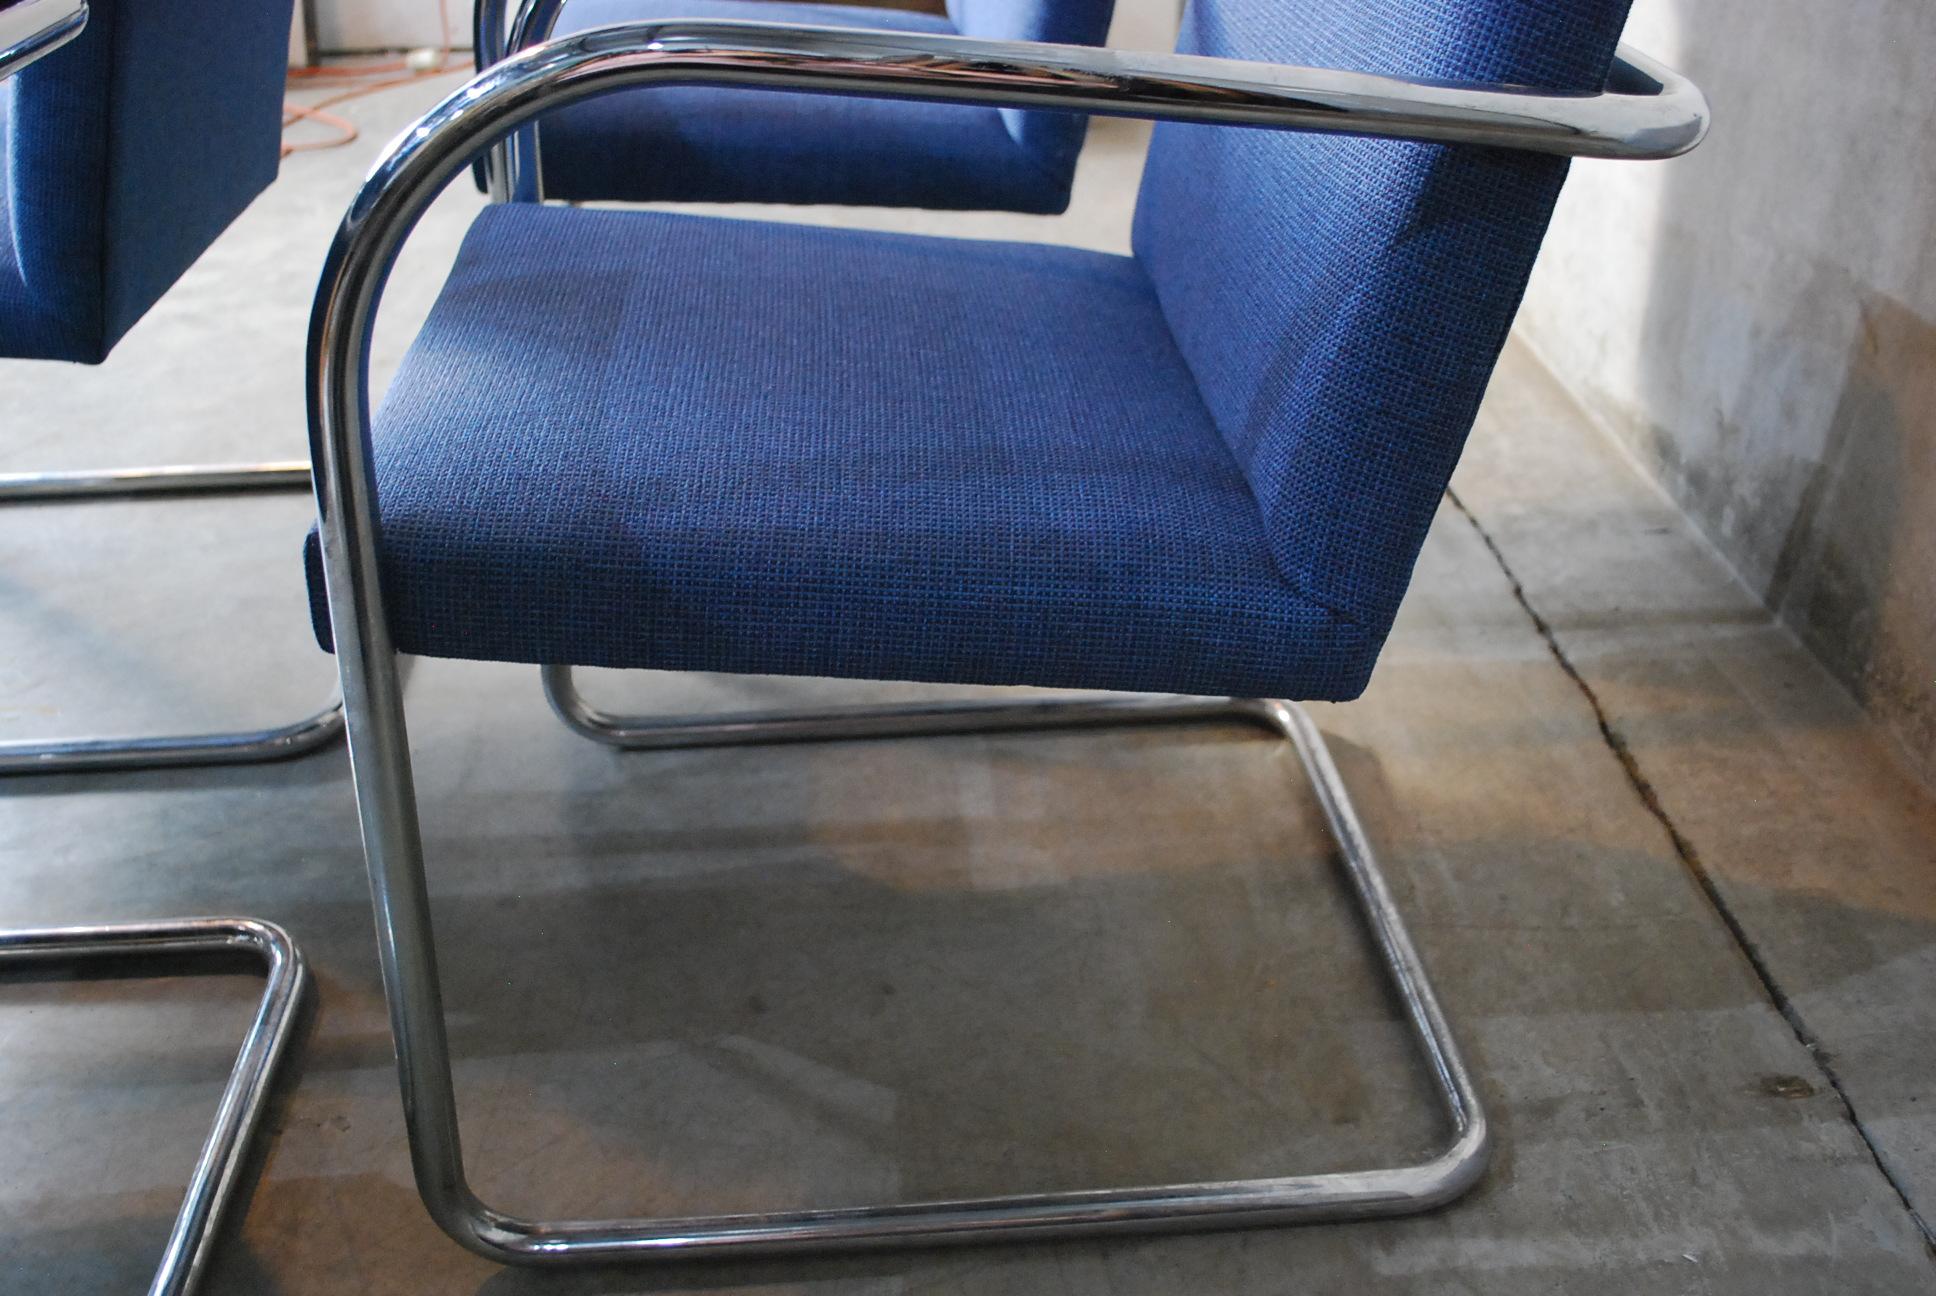 American 1970 Set of Two Cantilever Chrome Brno Chairs by Thonet